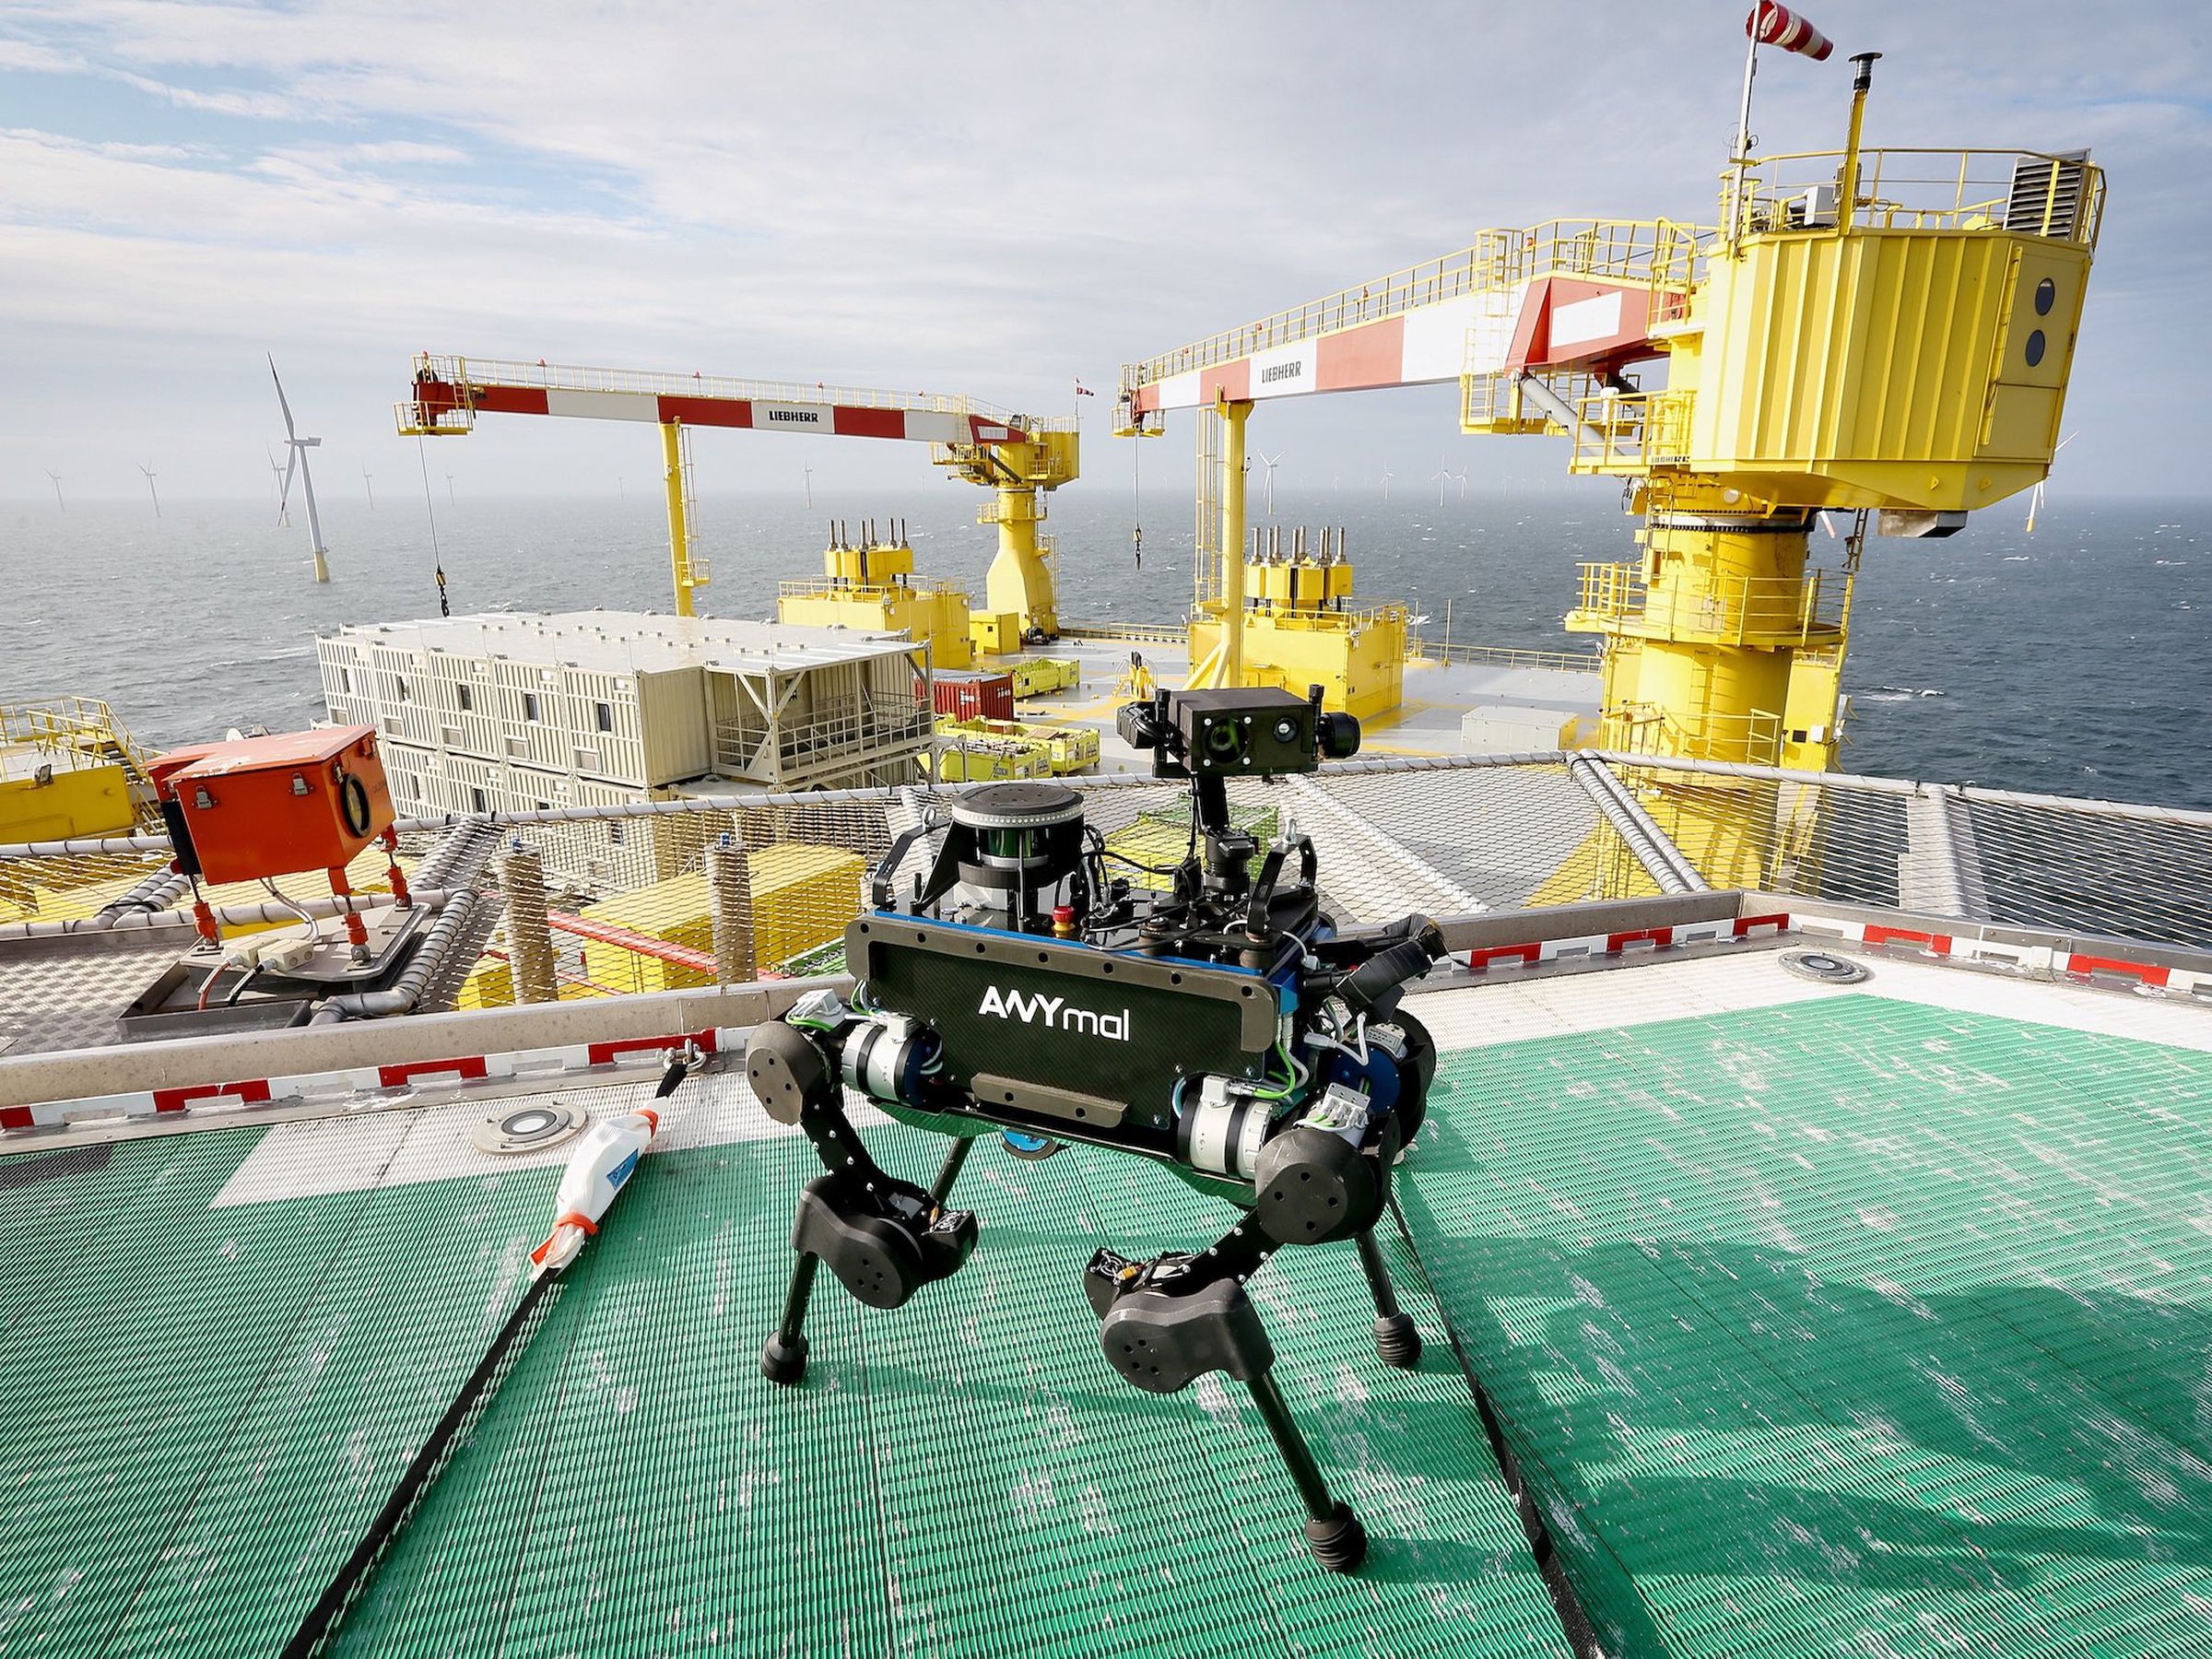 ANYmal has been used to survey an offshore energy platform.